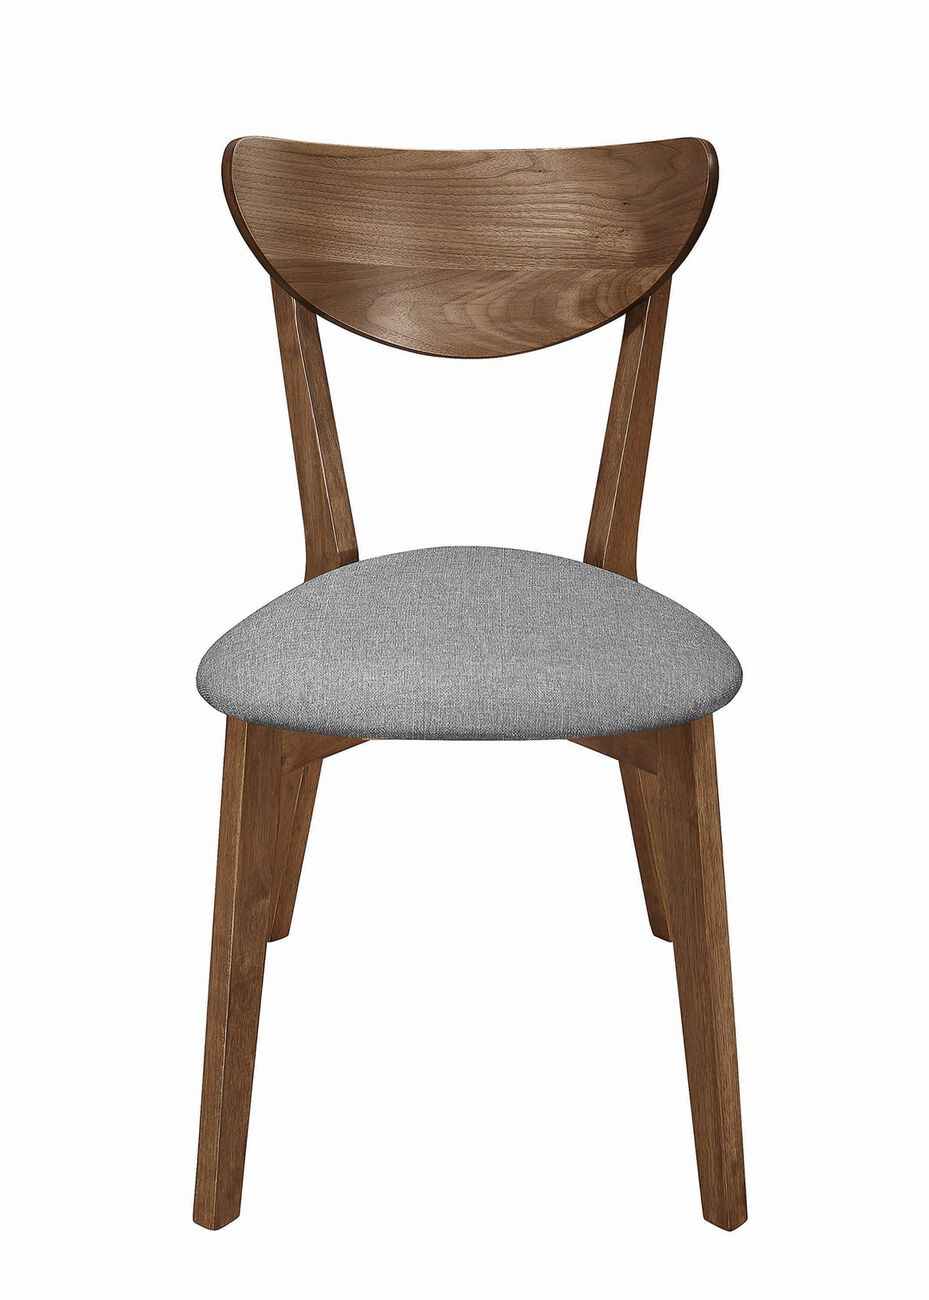 Wooden Plectrum Shape Padded Seat Dining Chair, Set of 2, Brown and Gray